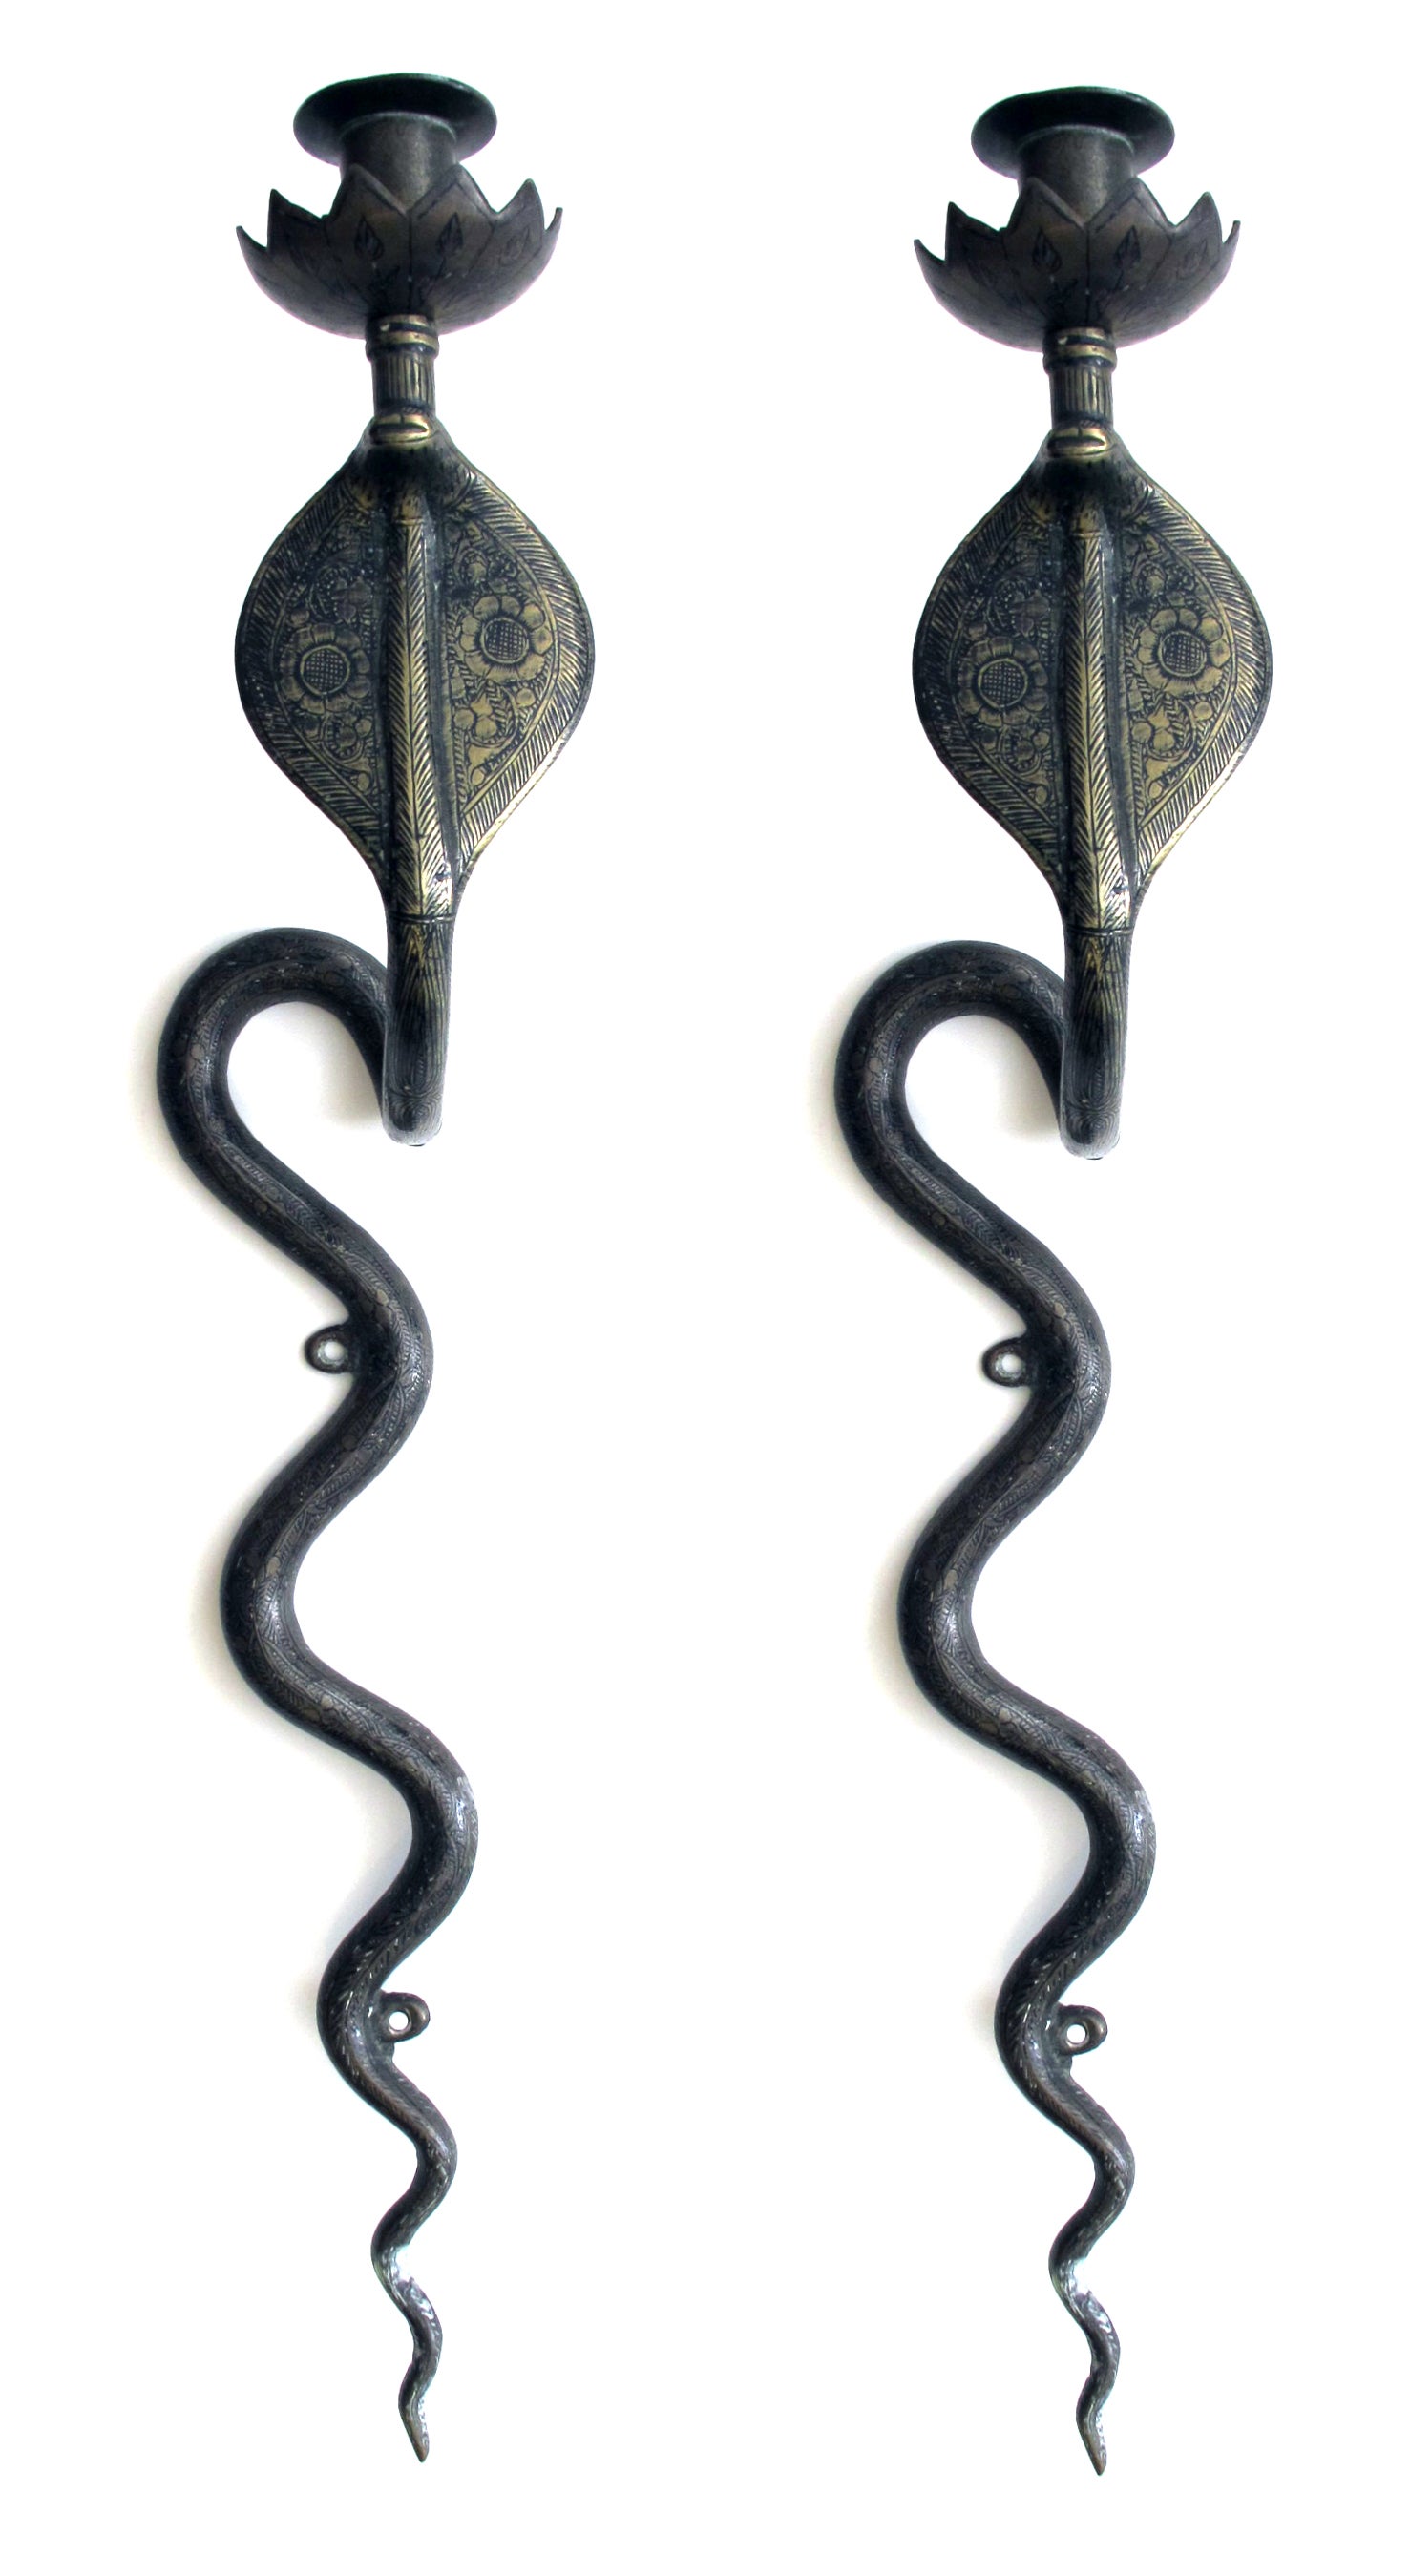 A Pair of French Egyptian Revival Bronze Wall Sconces in the Shape of Cobras